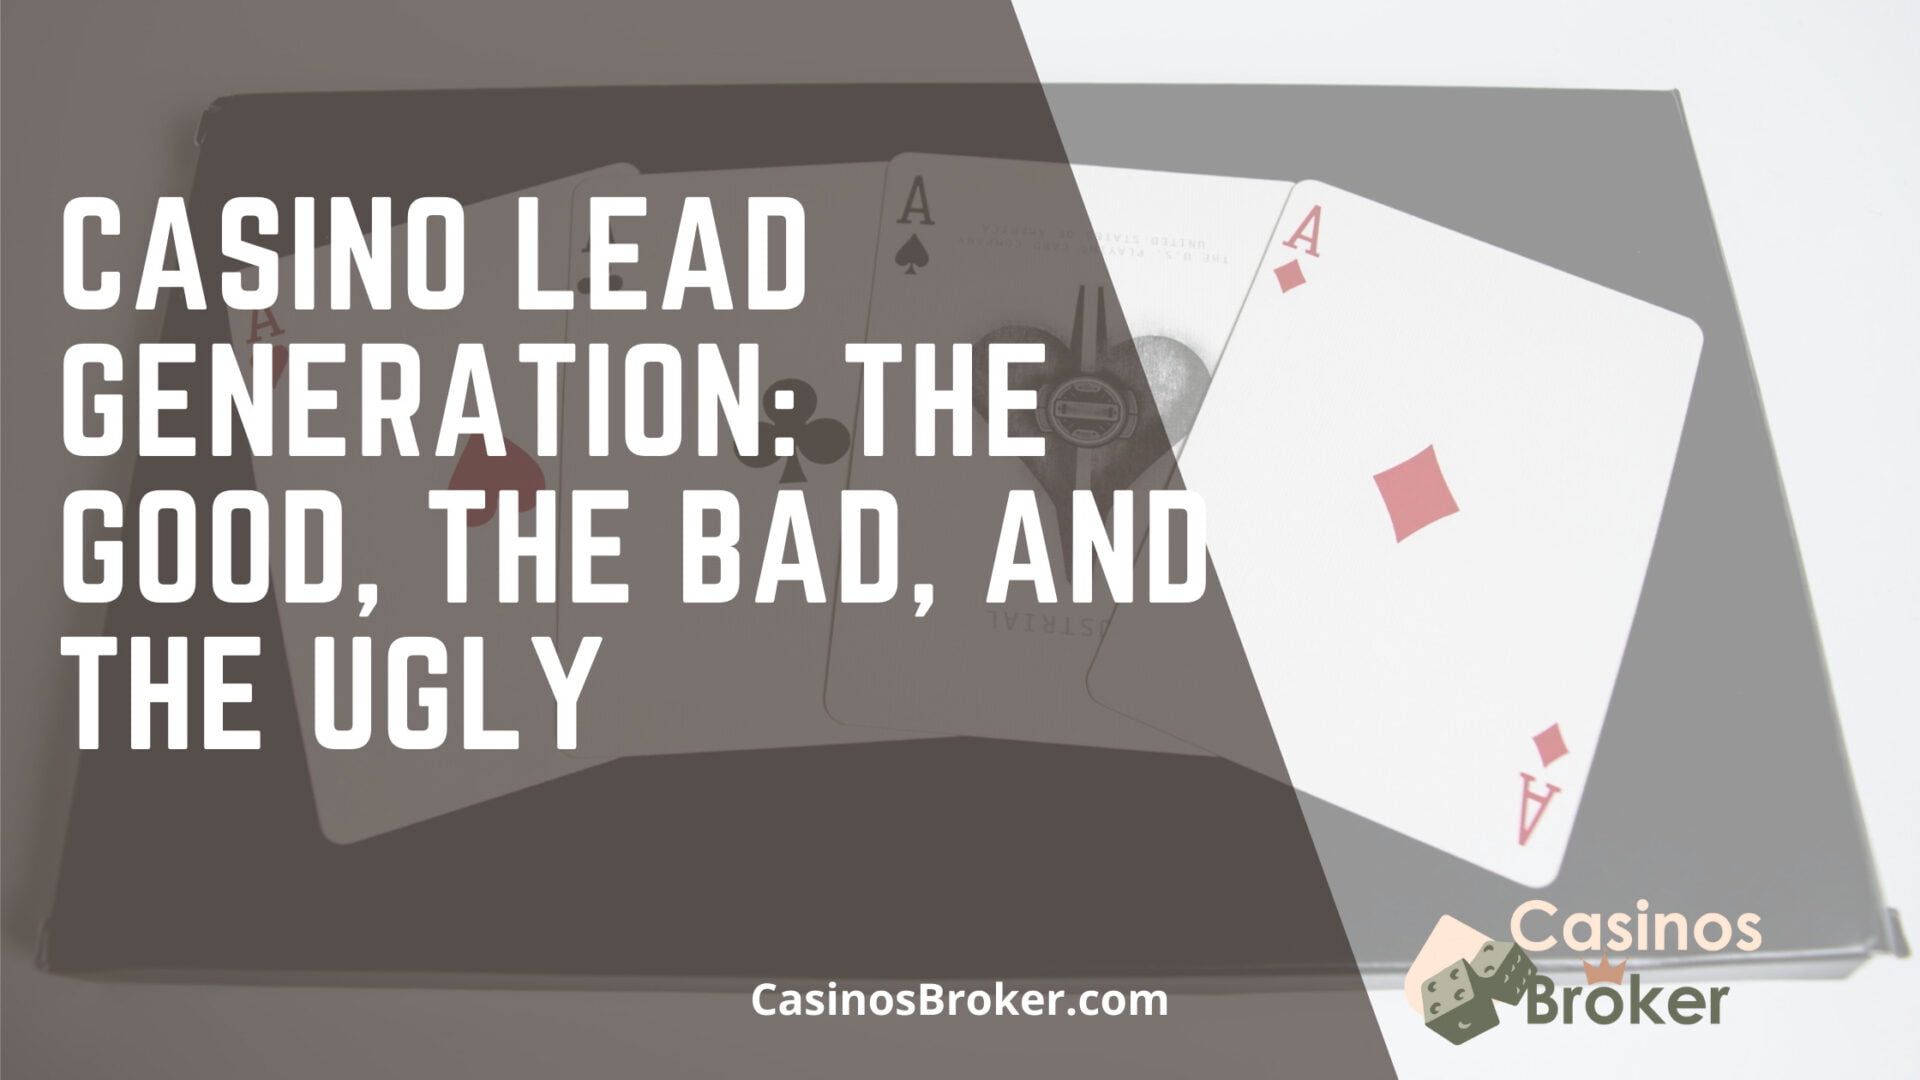 Casino Lead Generation: The Good, the Bad, and the Ugly